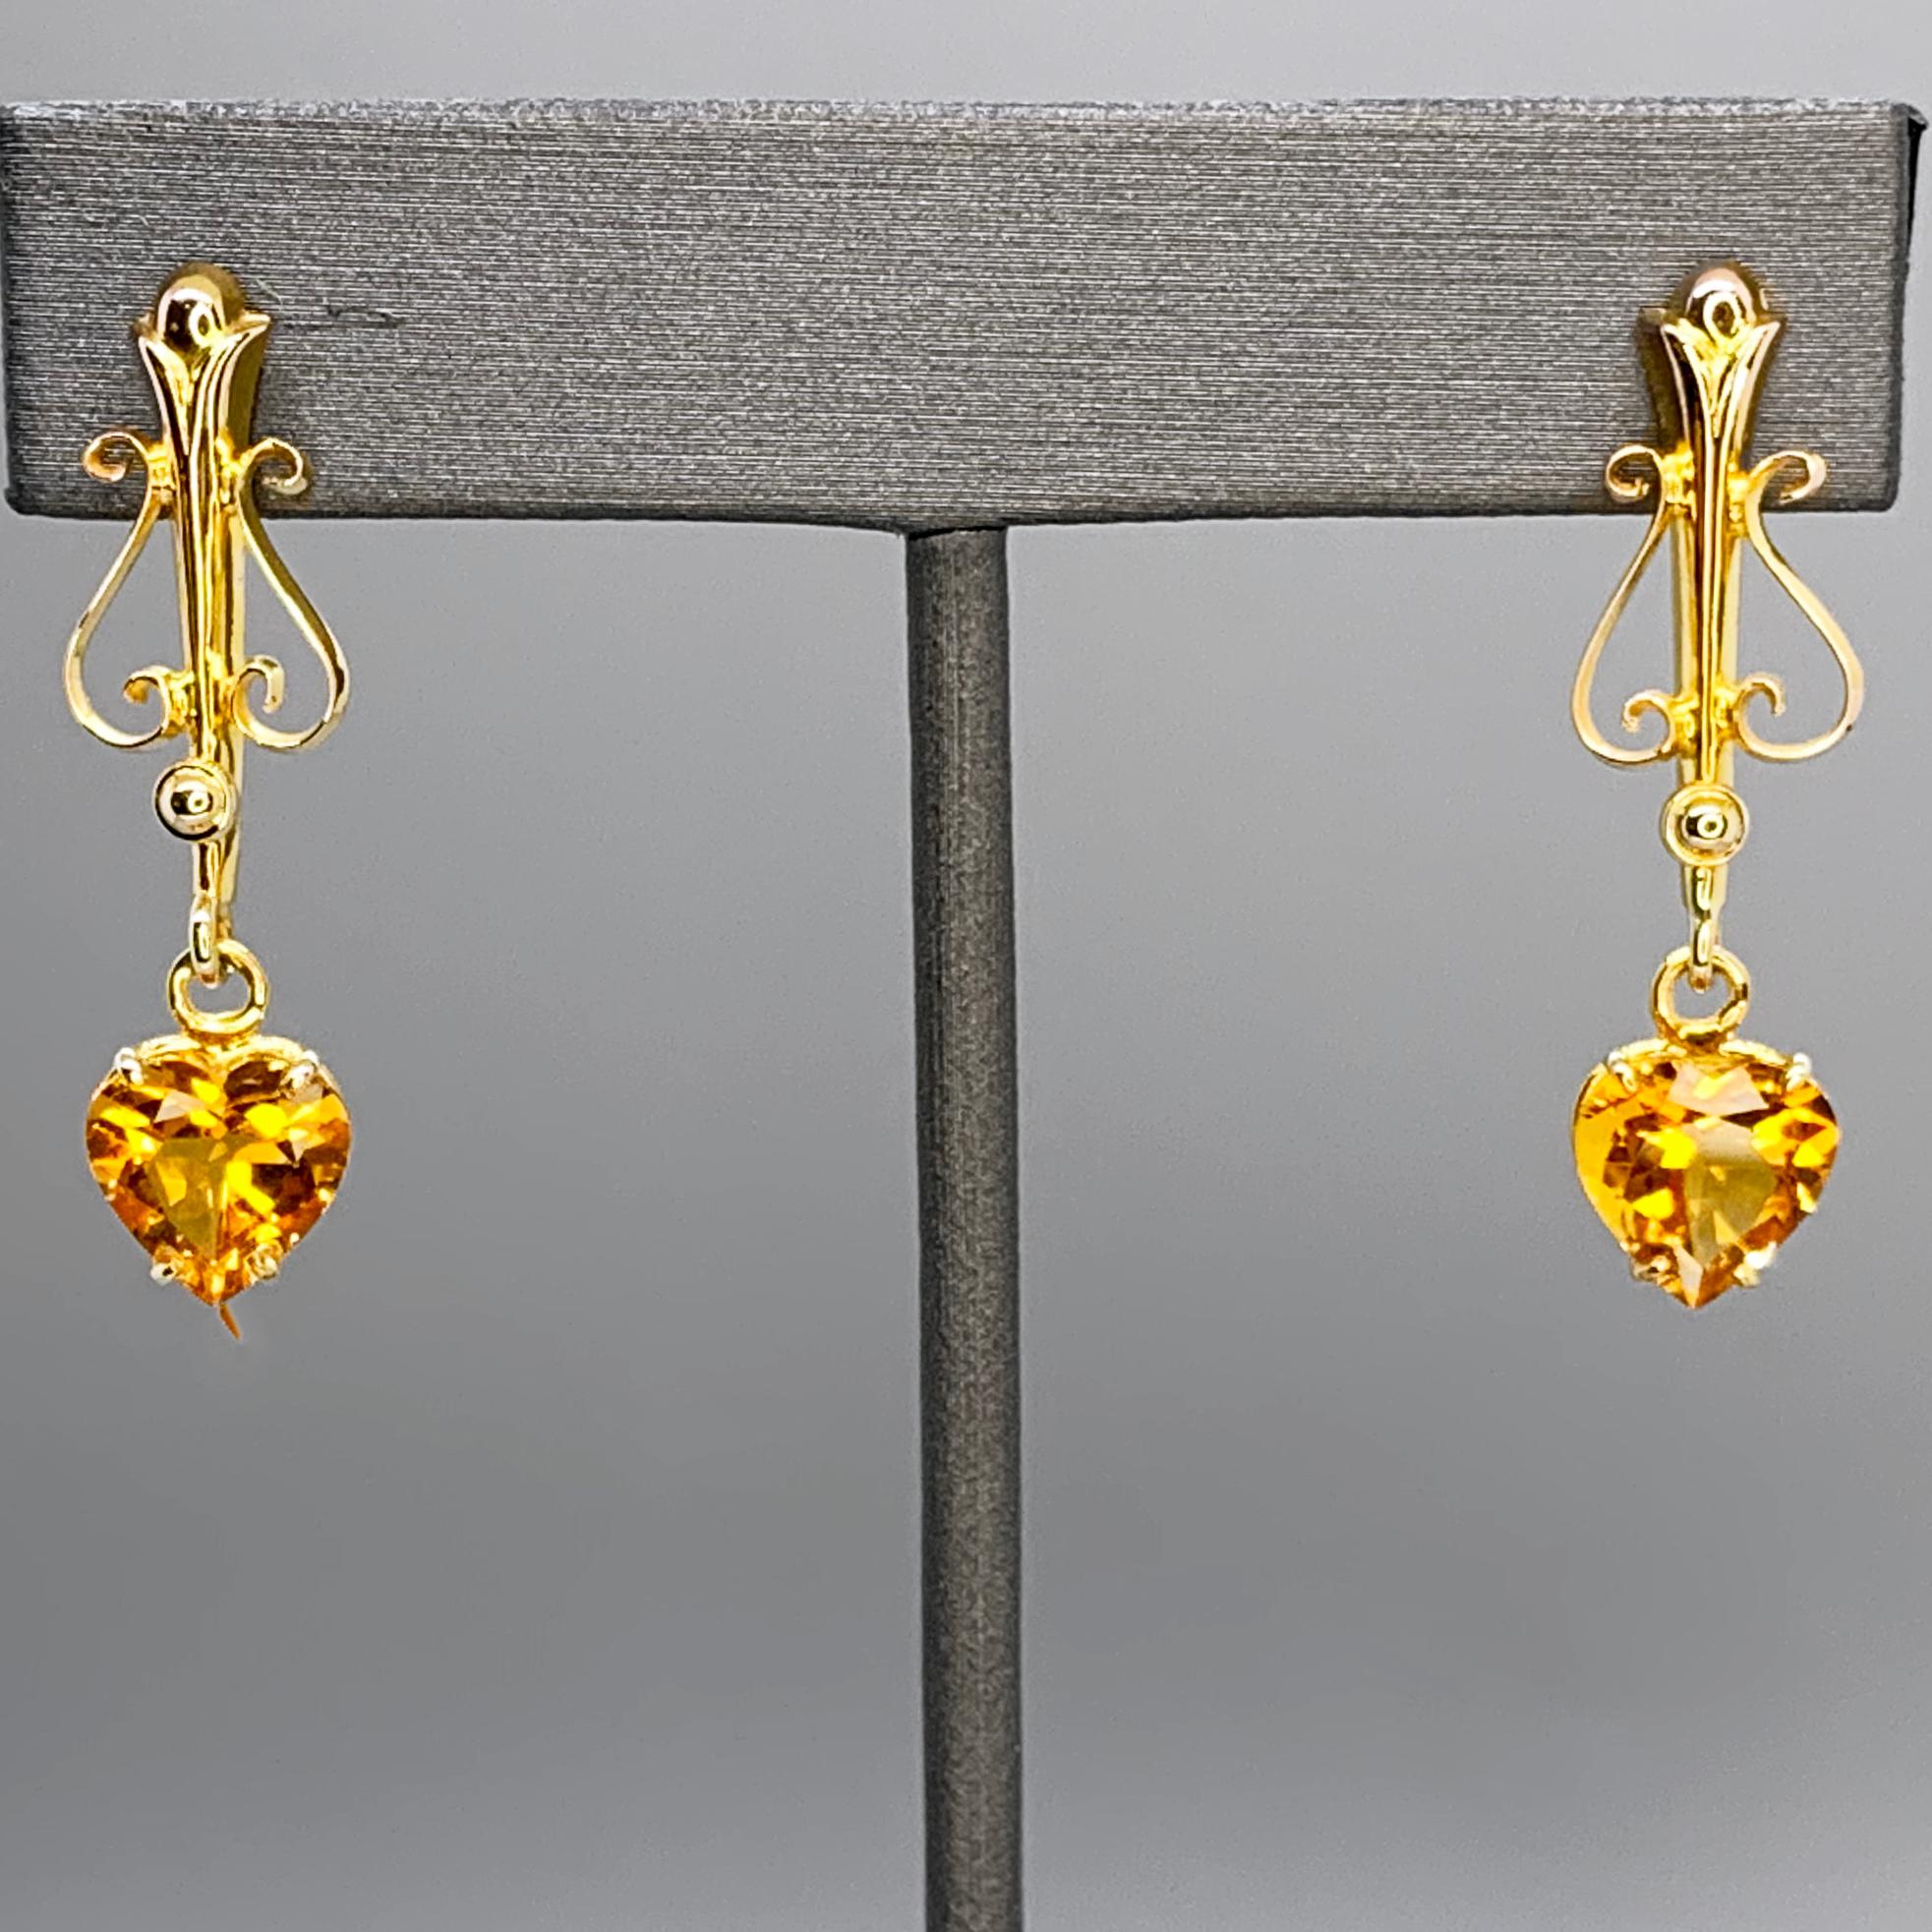 Opulence in simplicity. For these upcycled dangly earrings, I took a vintage brooch likely dating from the 1940's, and reimagined it into a pair of sparkly heart shaped citrine earrings that perfectly blend clean modern design with the delicate